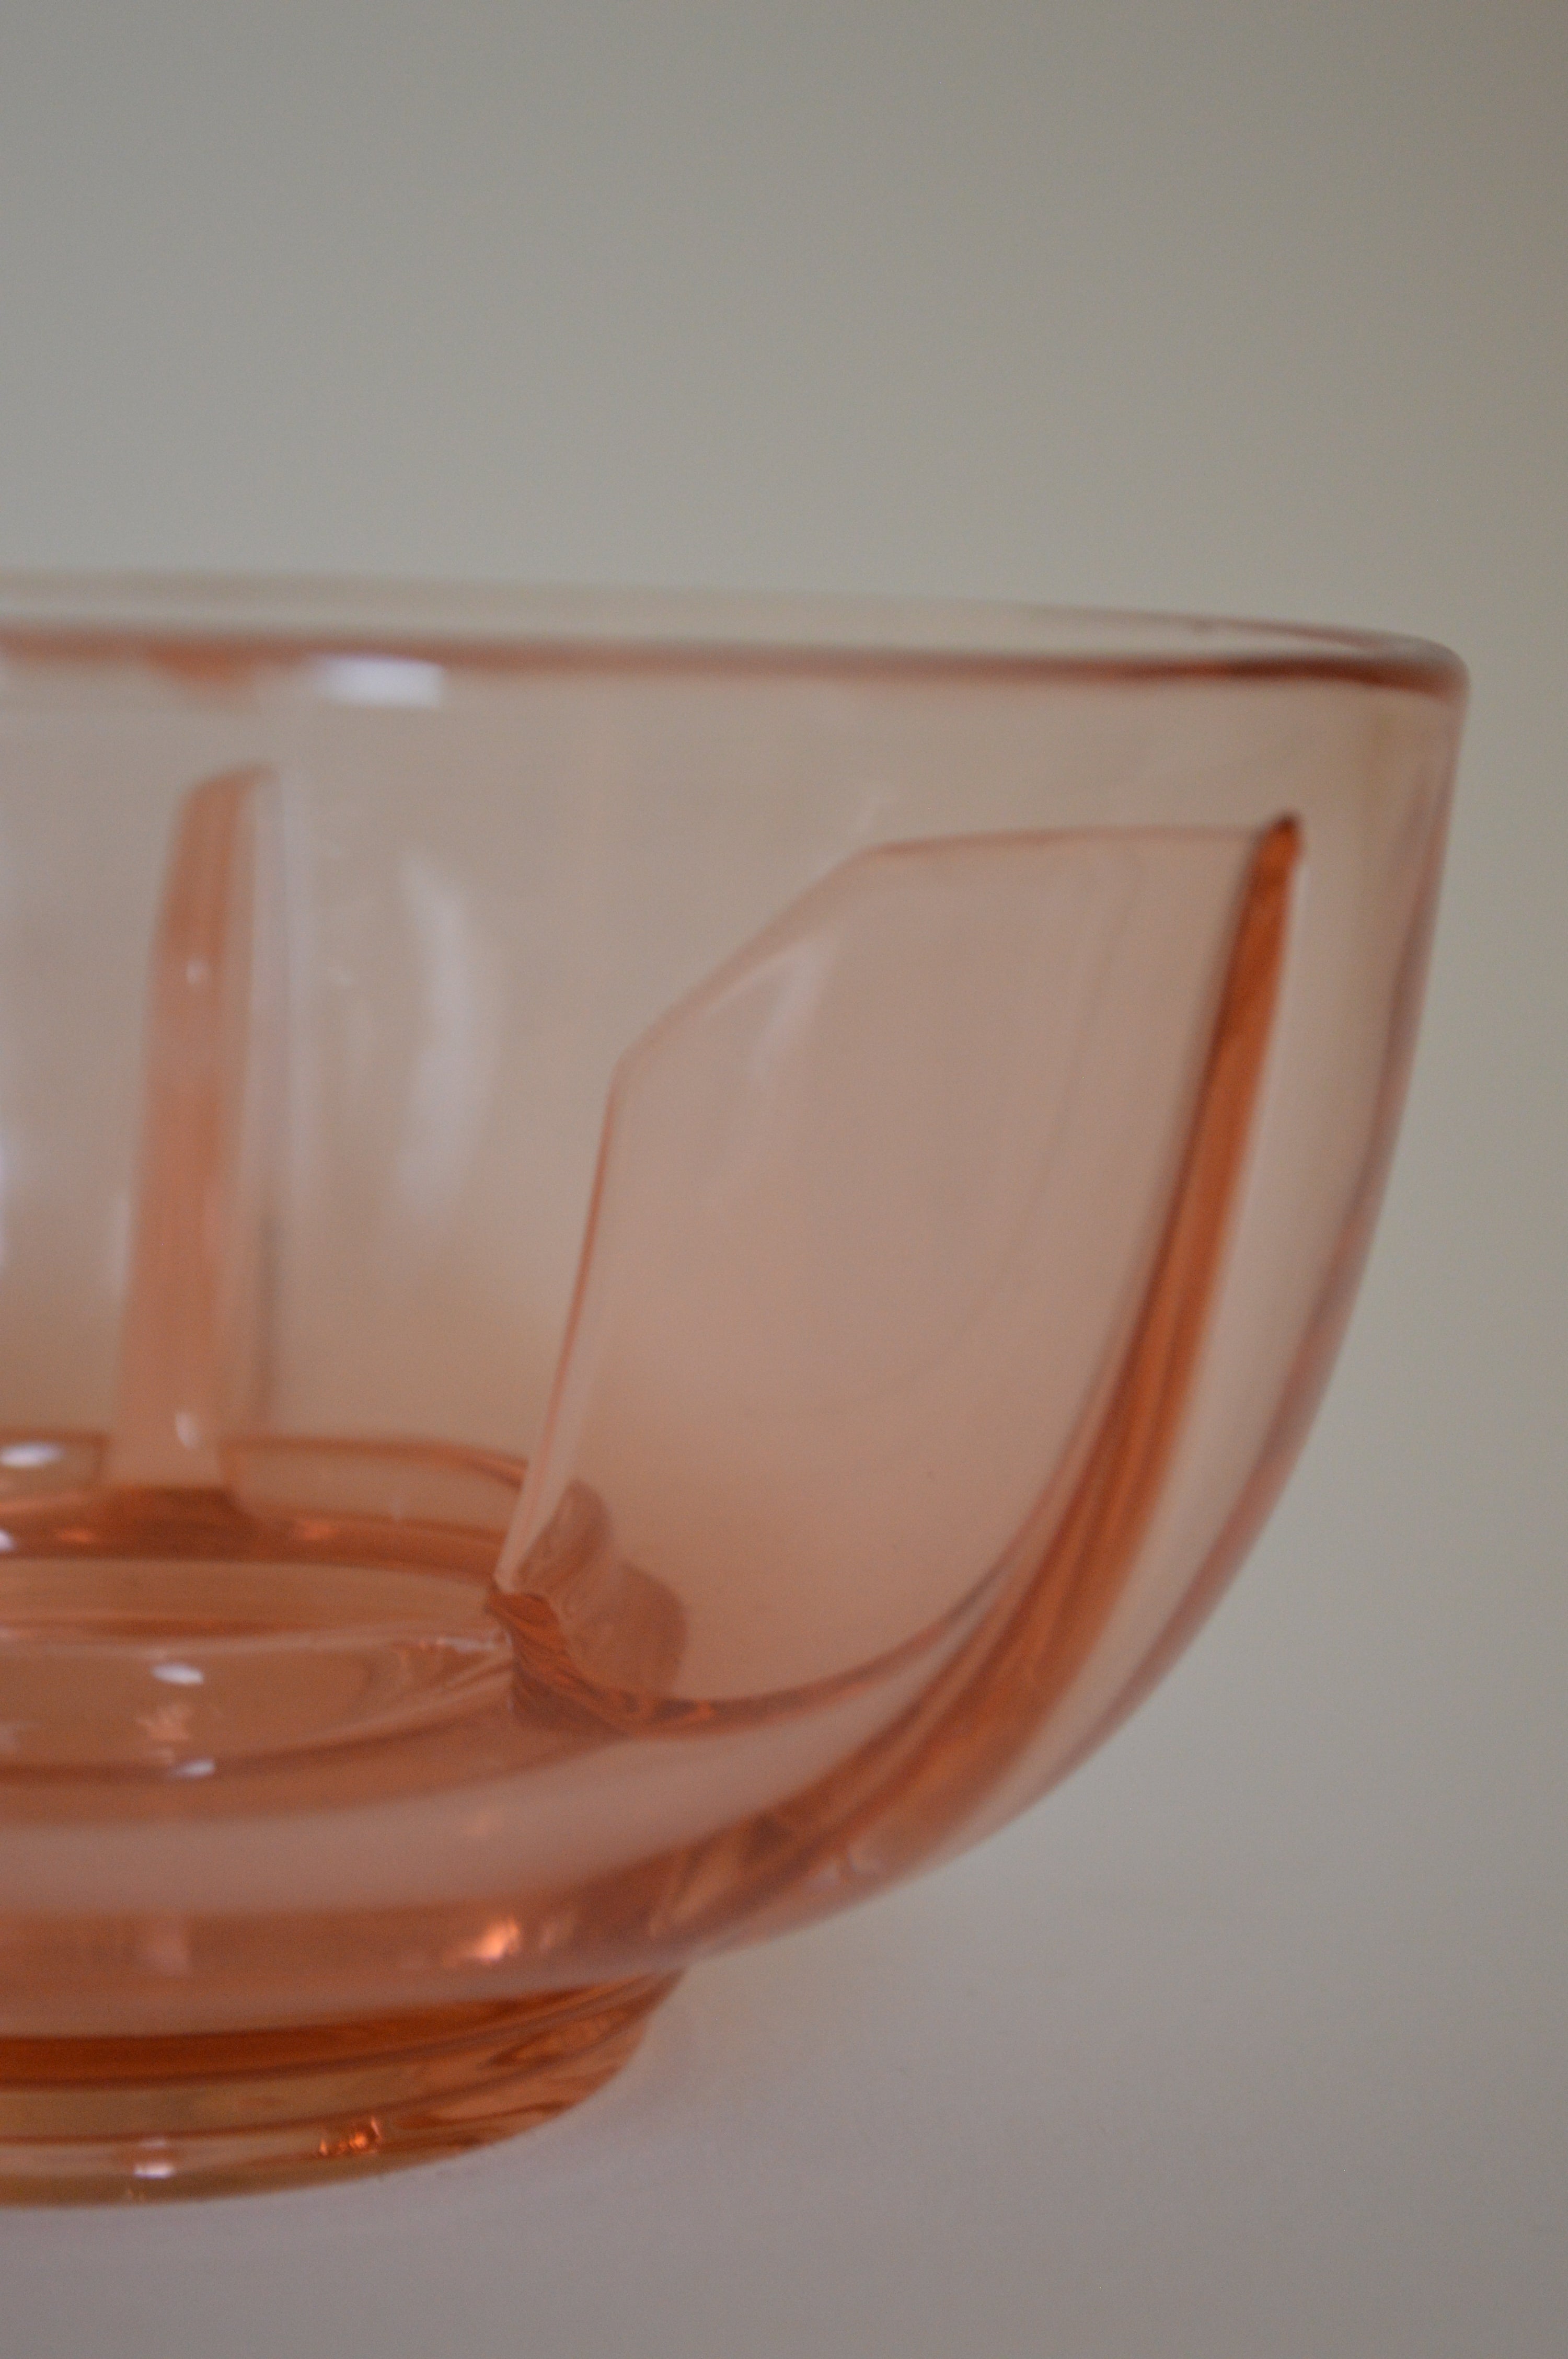 PINK GLASS CANDLE HOLDER